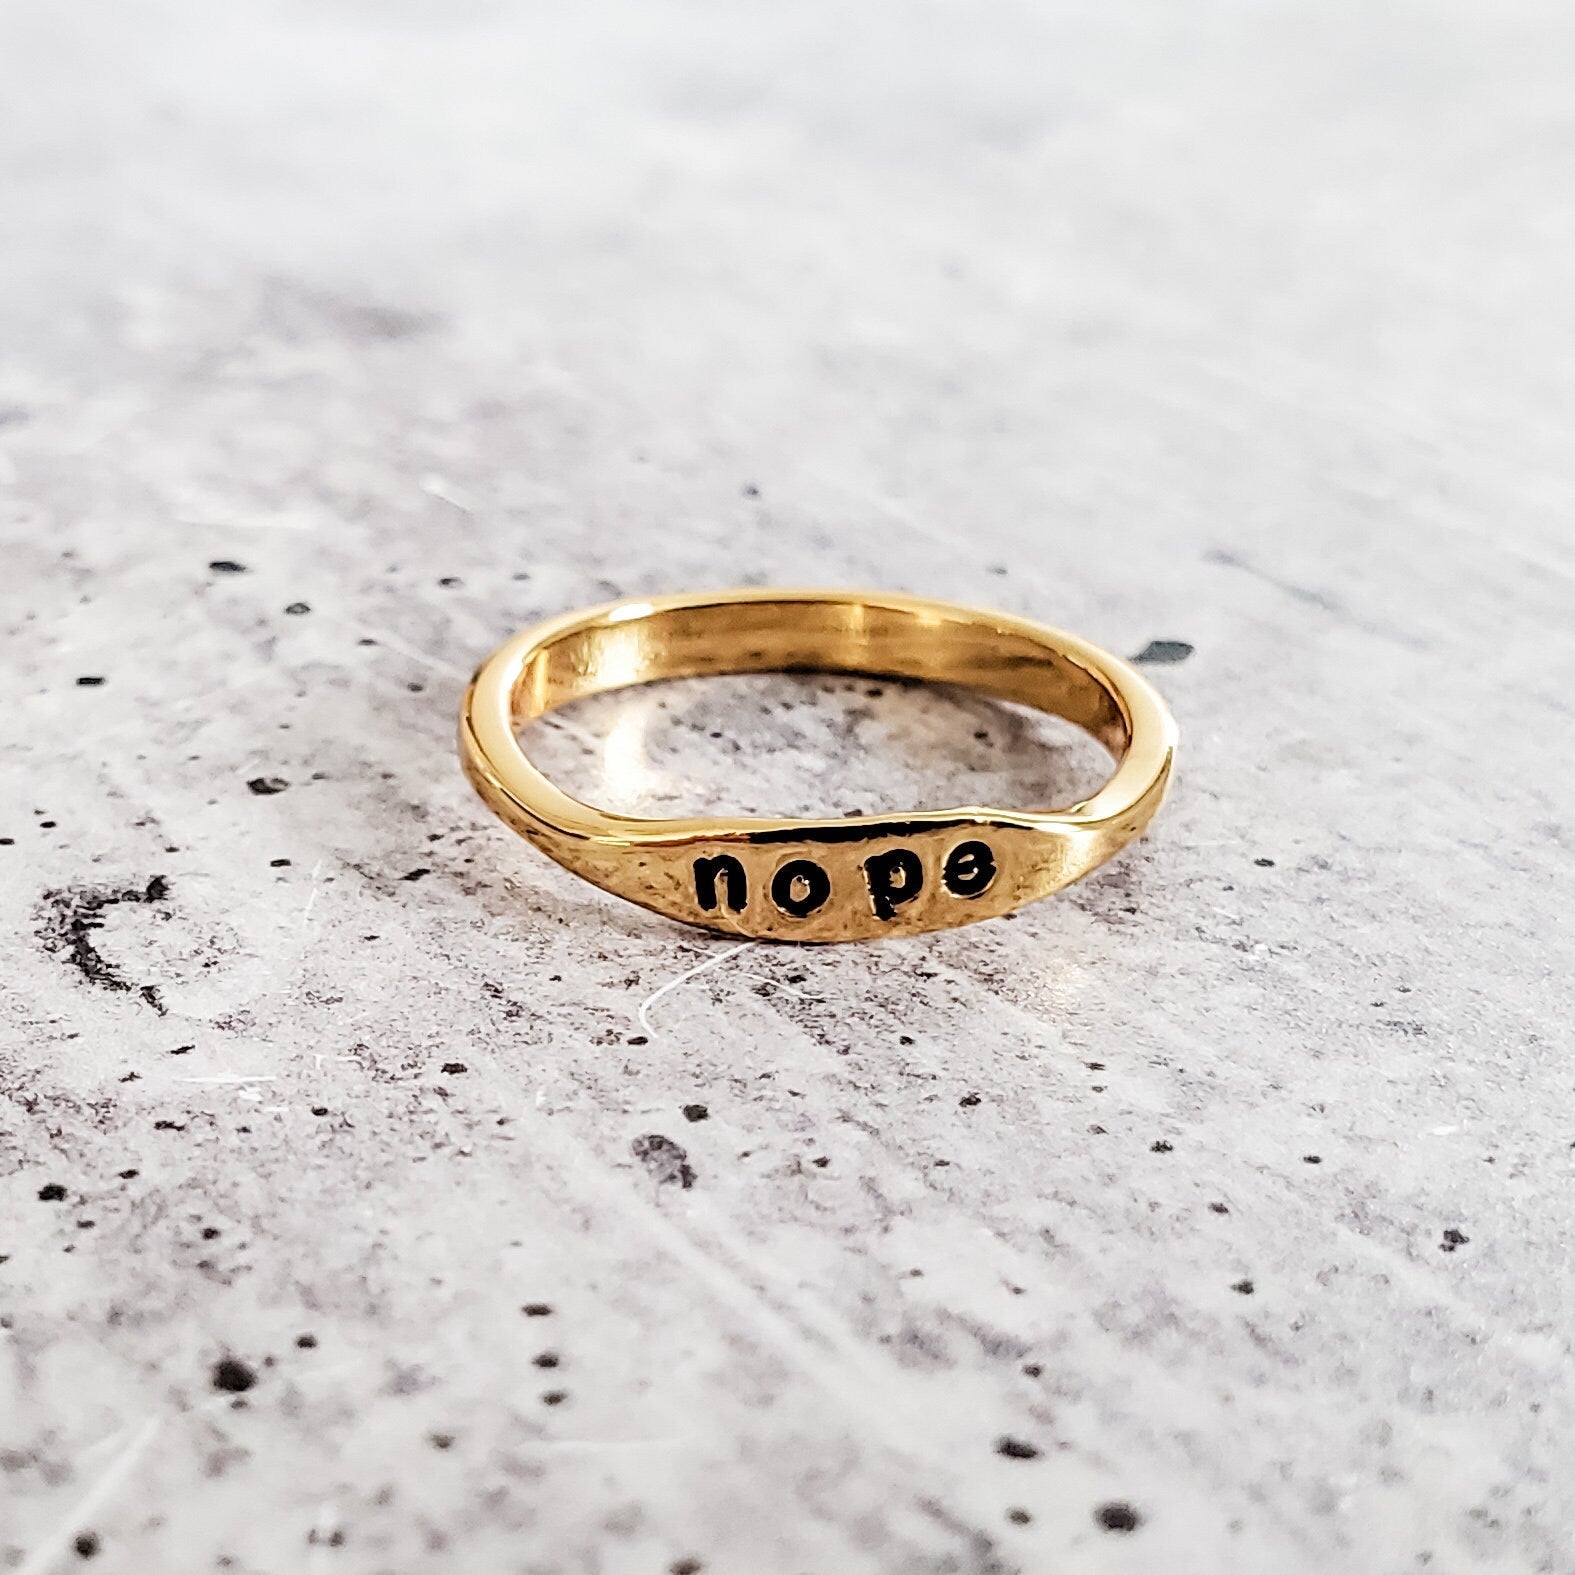 NOPE Dainty Ring - Minimalist Jewelry for Her - Stacking Ring for Single Friend - Funny Feminist Accessory - Holiday Gift for Best friends